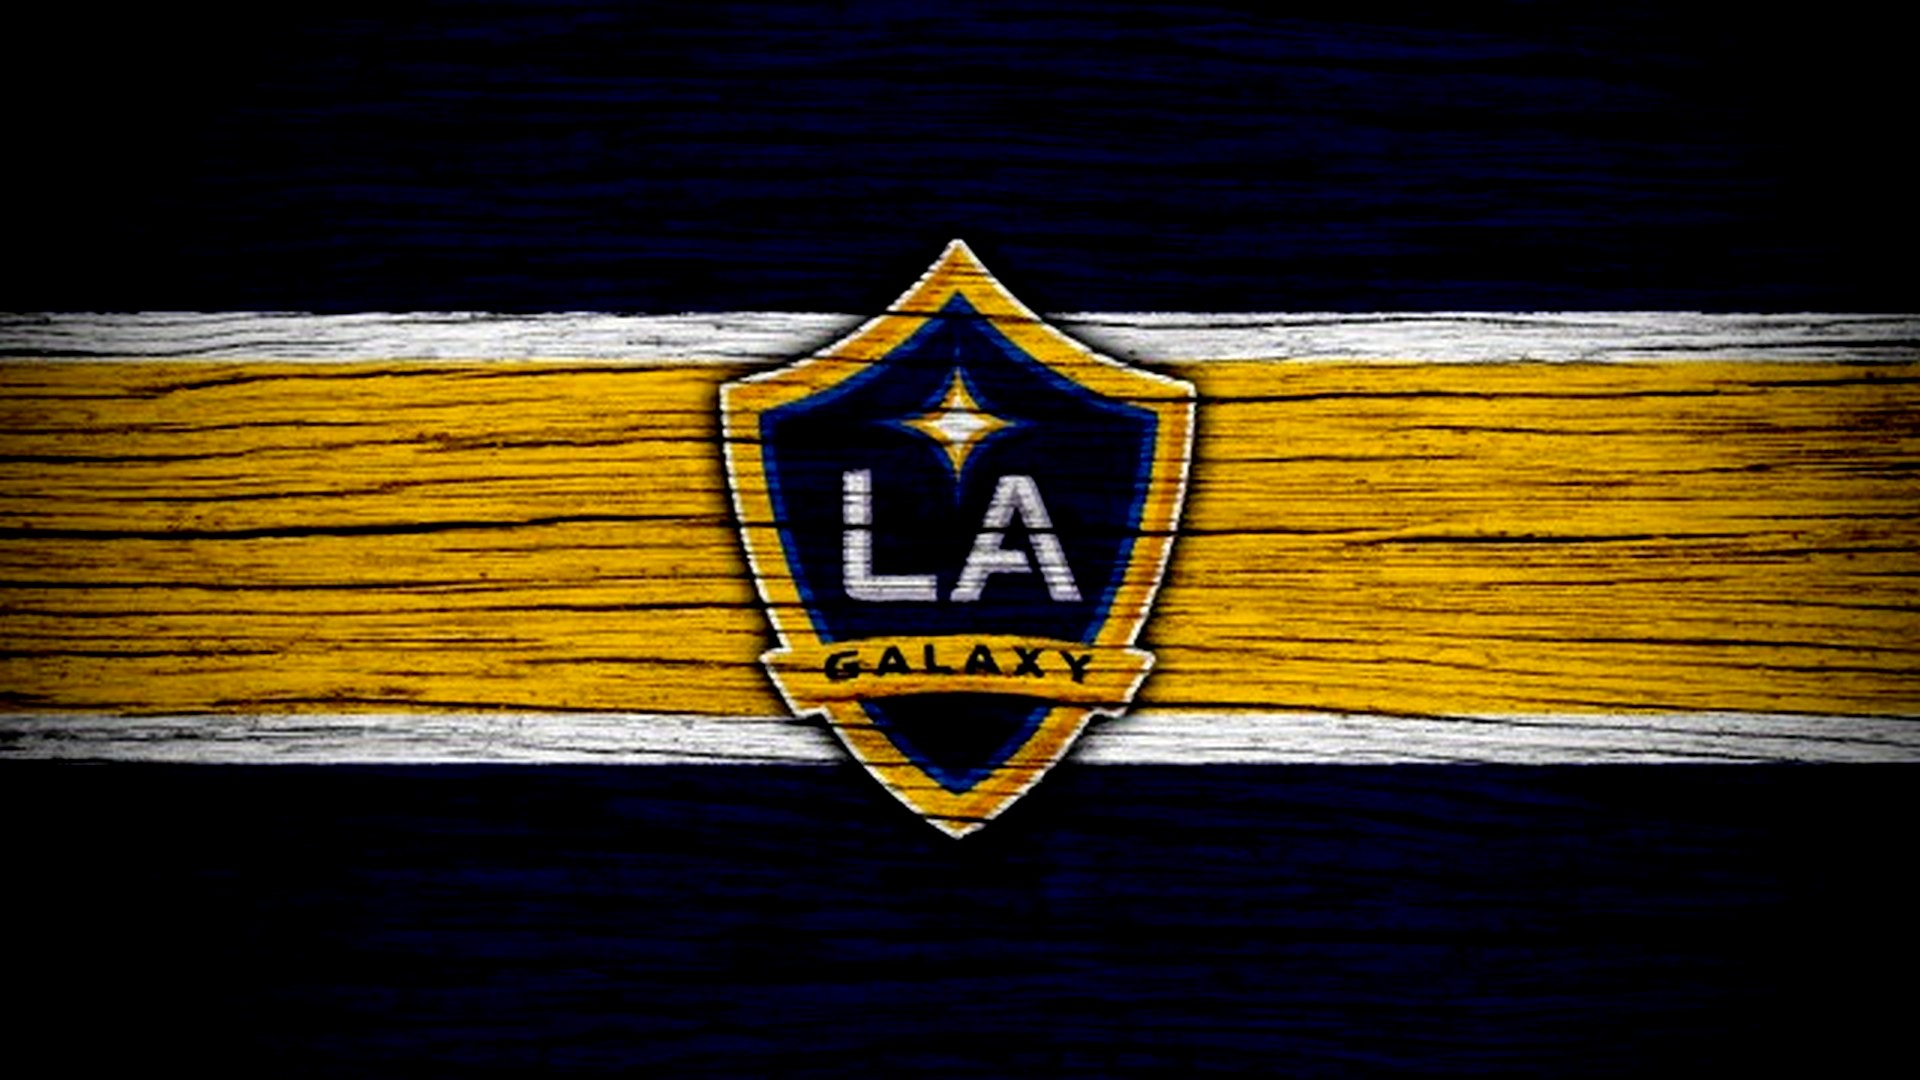 Wallpapers HD LA Galaxy with high-resolution 1920x1080 pixel. You can use this wallpaper for your Desktop Computers, Mac Screensavers, Windows Backgrounds, iPhone Wallpapers, Tablet or Android Lock screen and another Mobile device